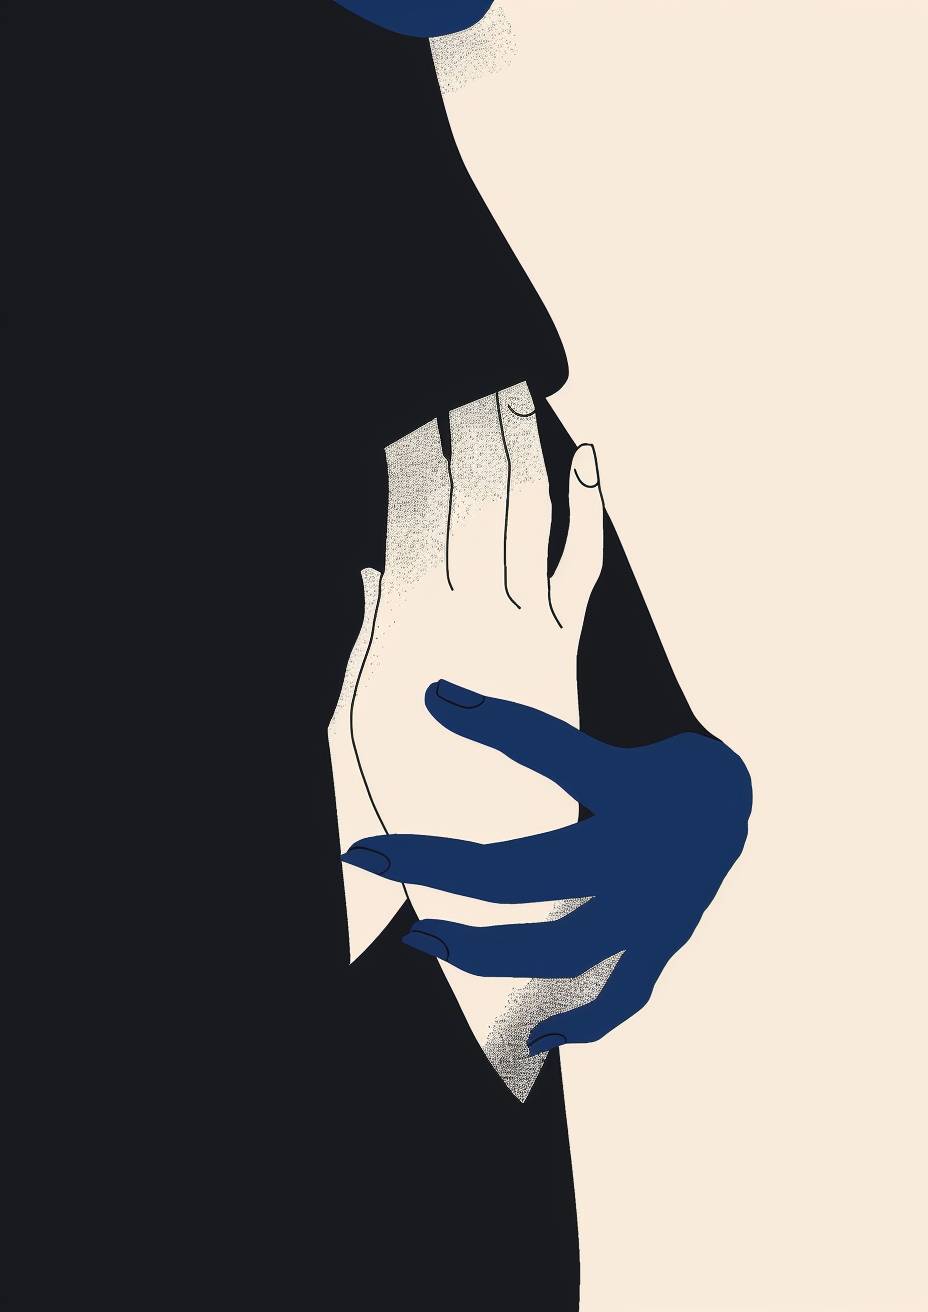 Minimalist illustration of a woman's hand holding a man in a blue and black color palette, done in the style of a minimalist artist.